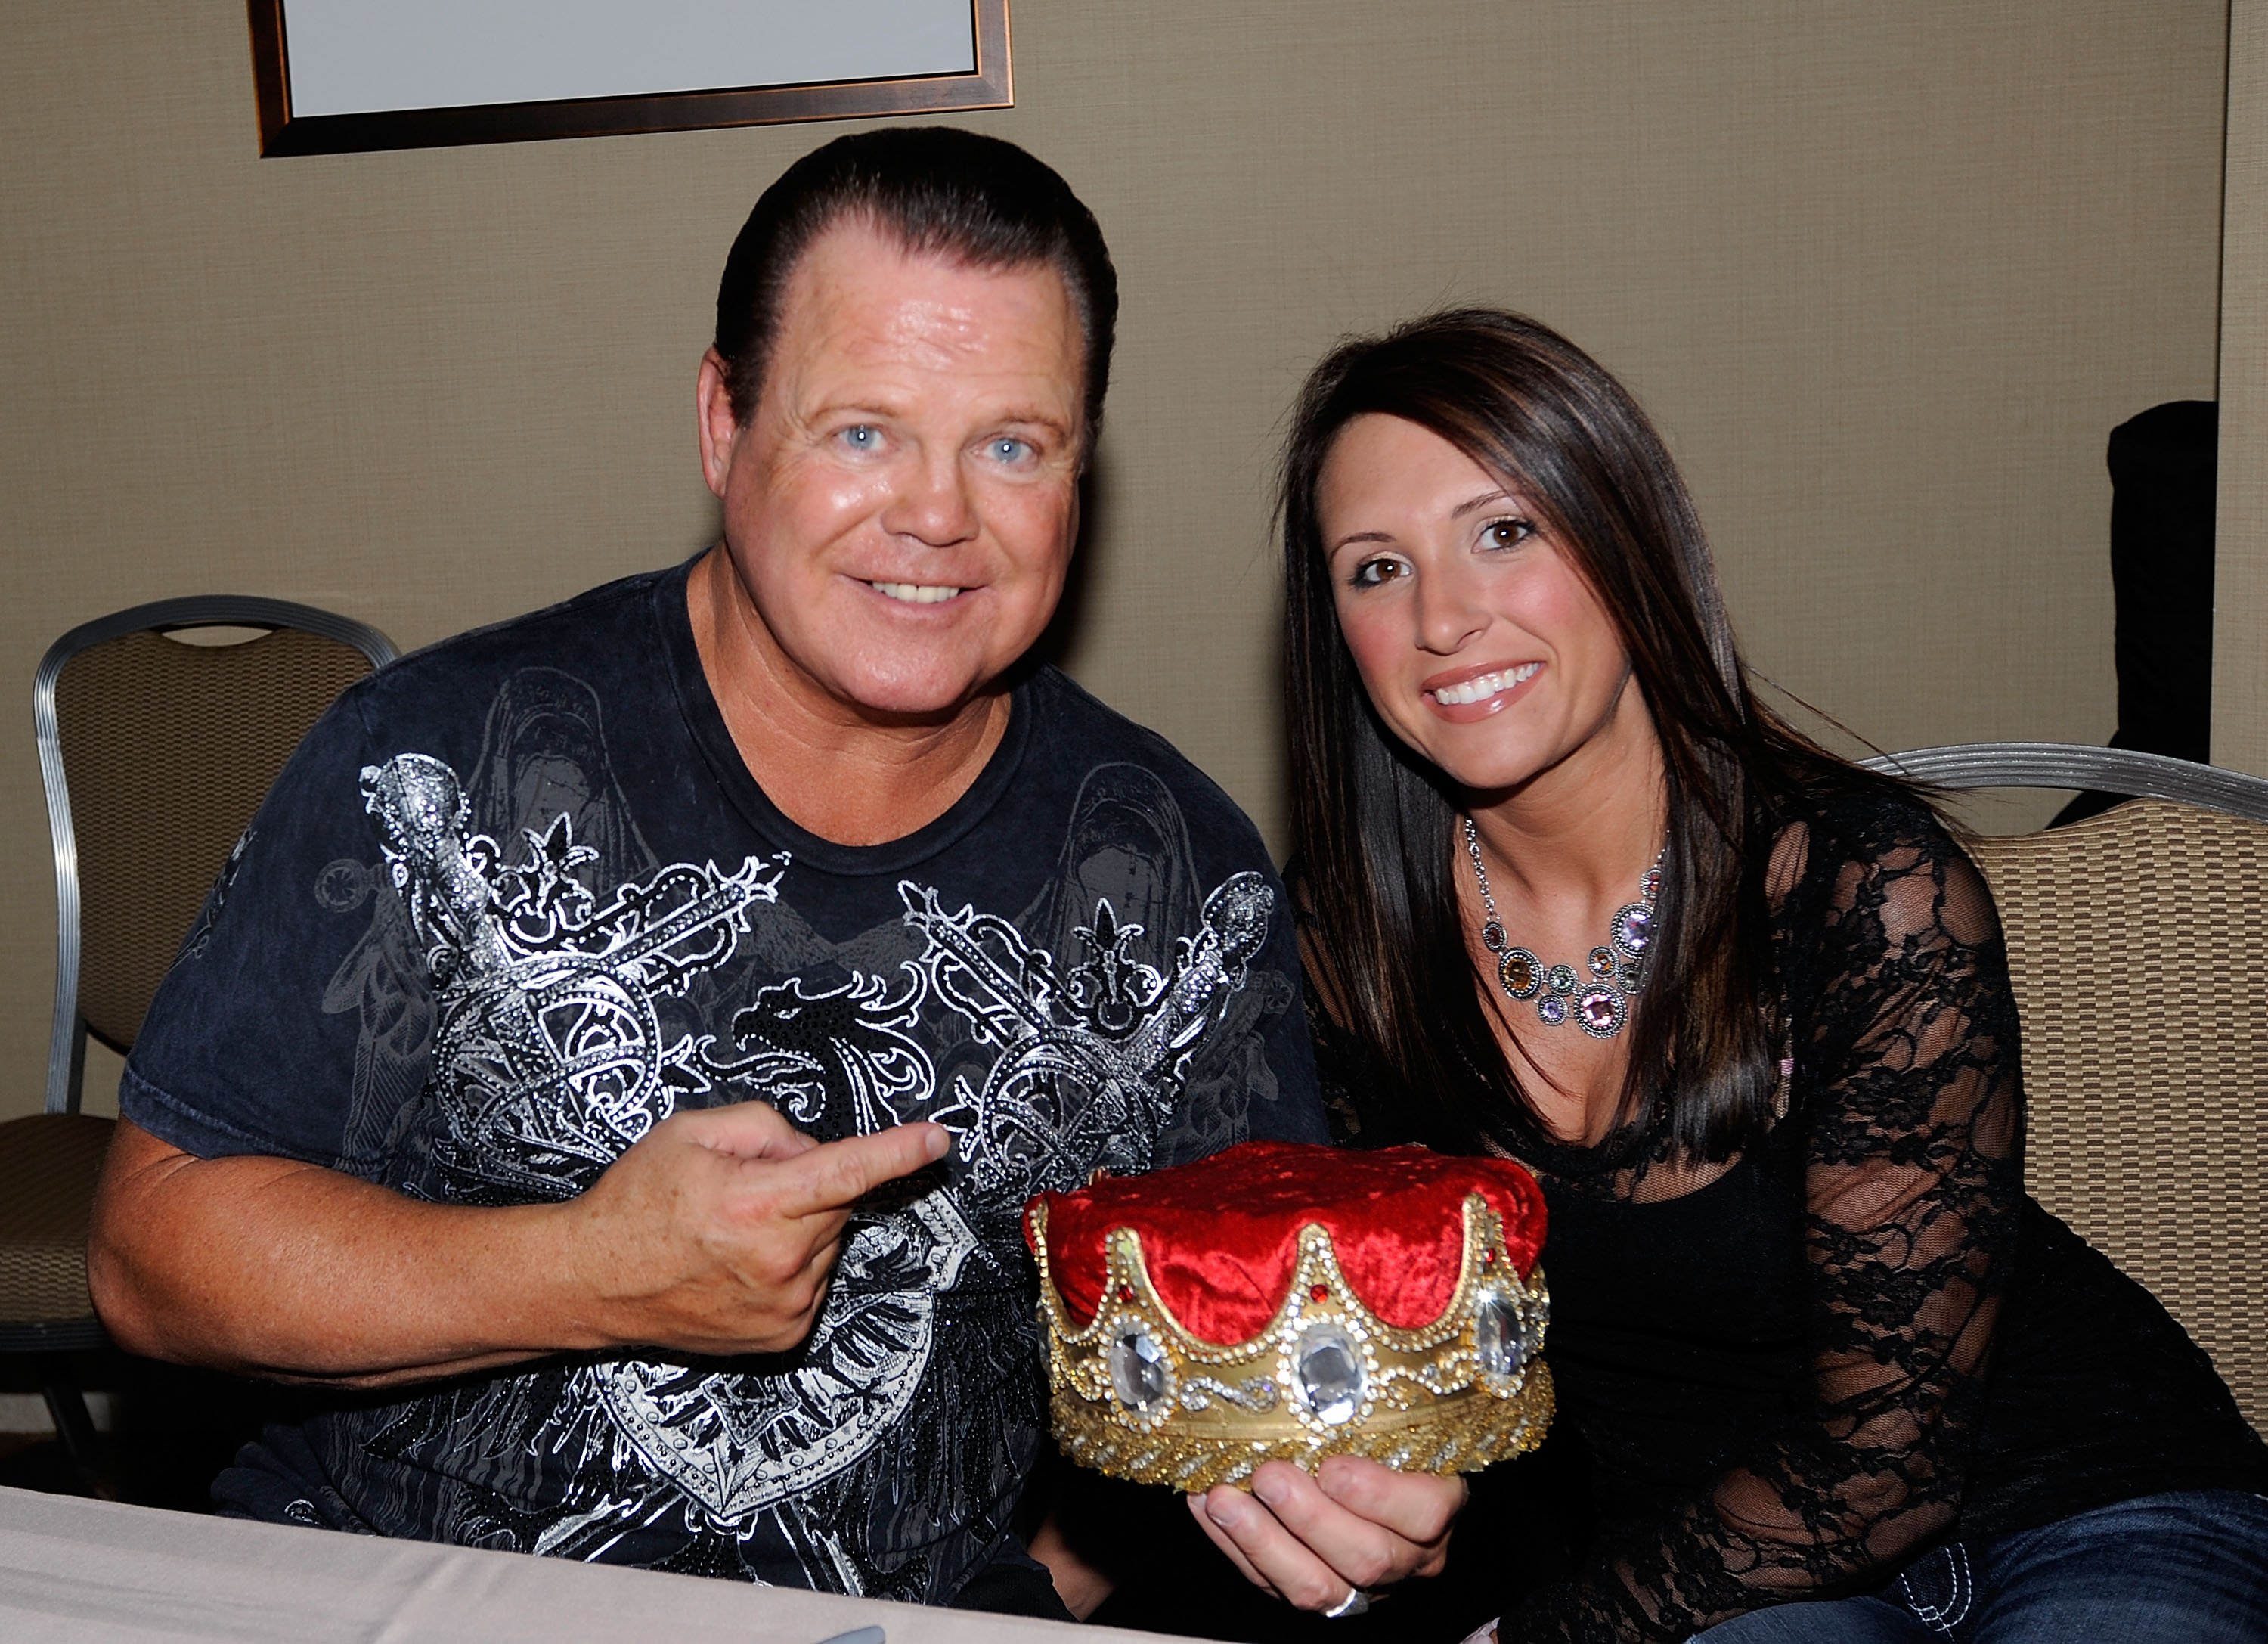 Jerry "The King" Lawler and Lauryn McBride at Sheraton Parsippany Hotel on April 26, 2013, in Parsippany, New Jersey. | Source: Getty Images